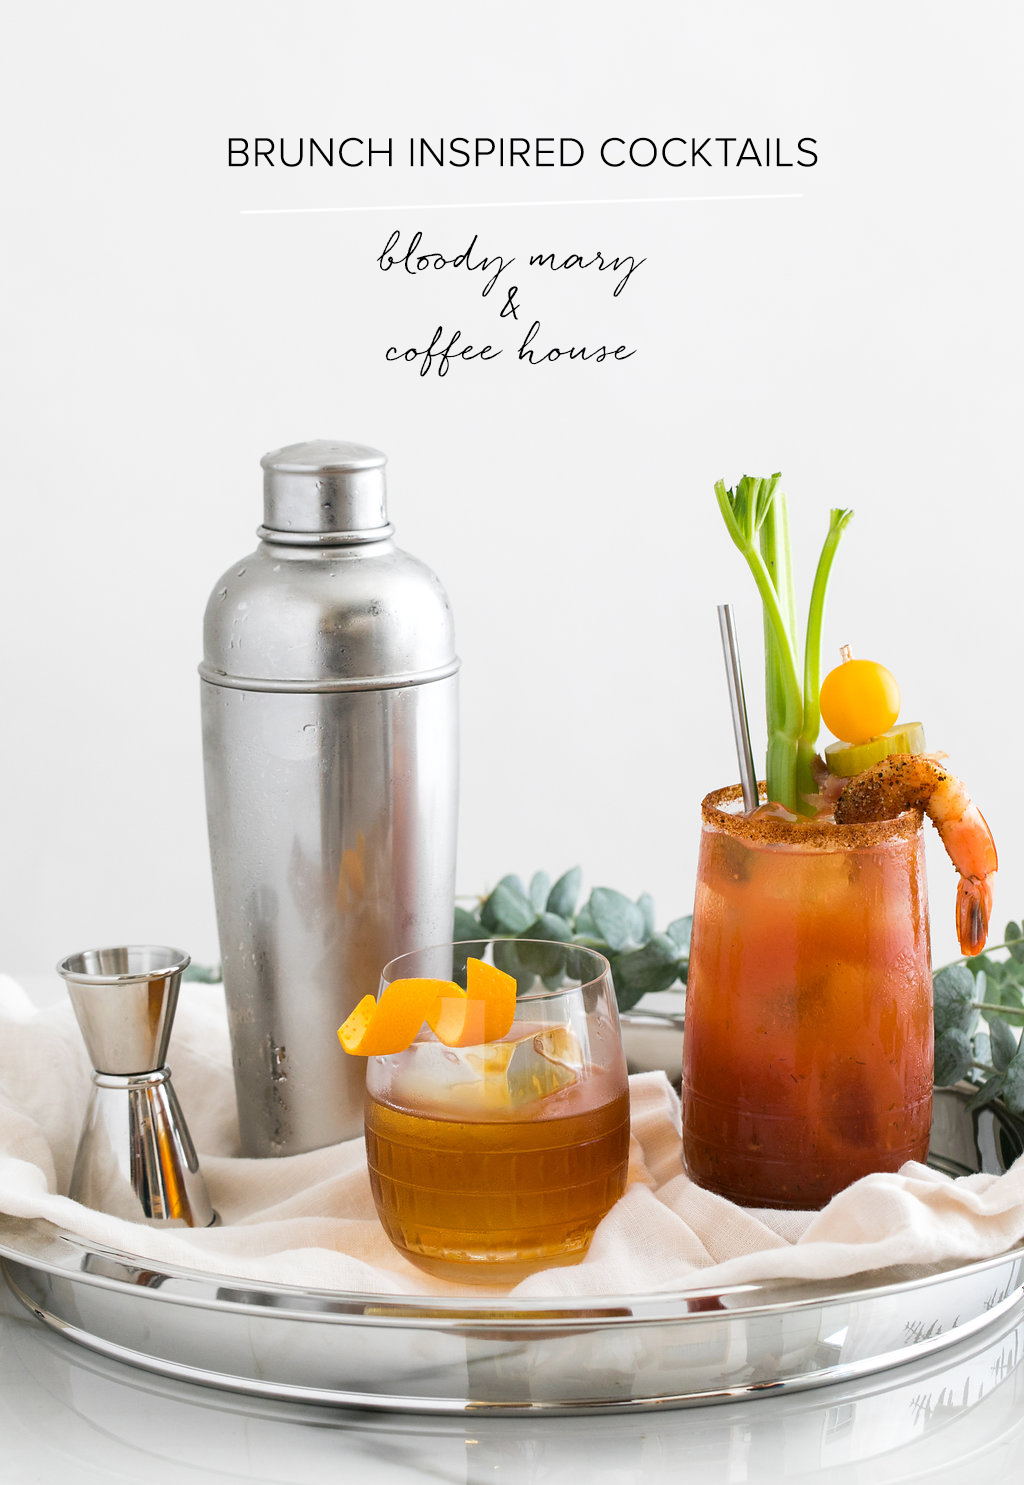 Brunch-inspired cocktails with Crate and Barrel